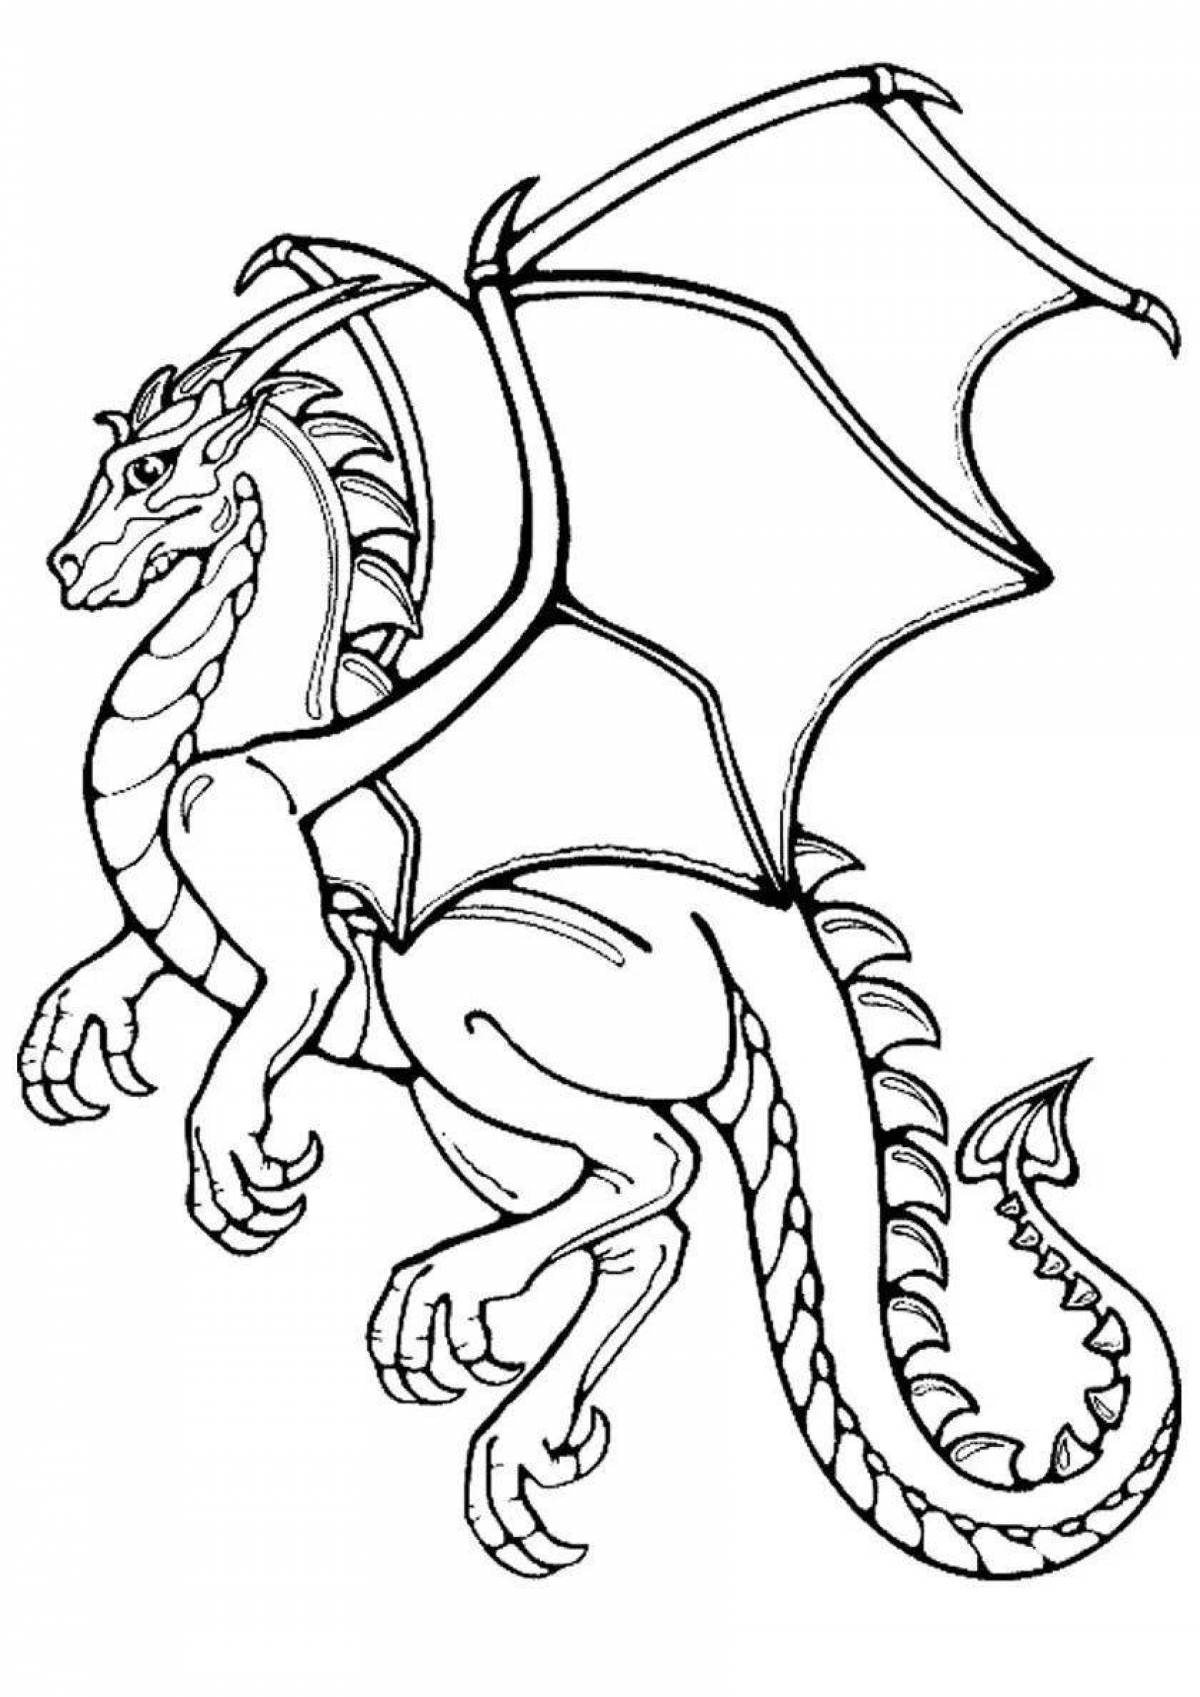 Incredible dragon coloring pages for boys